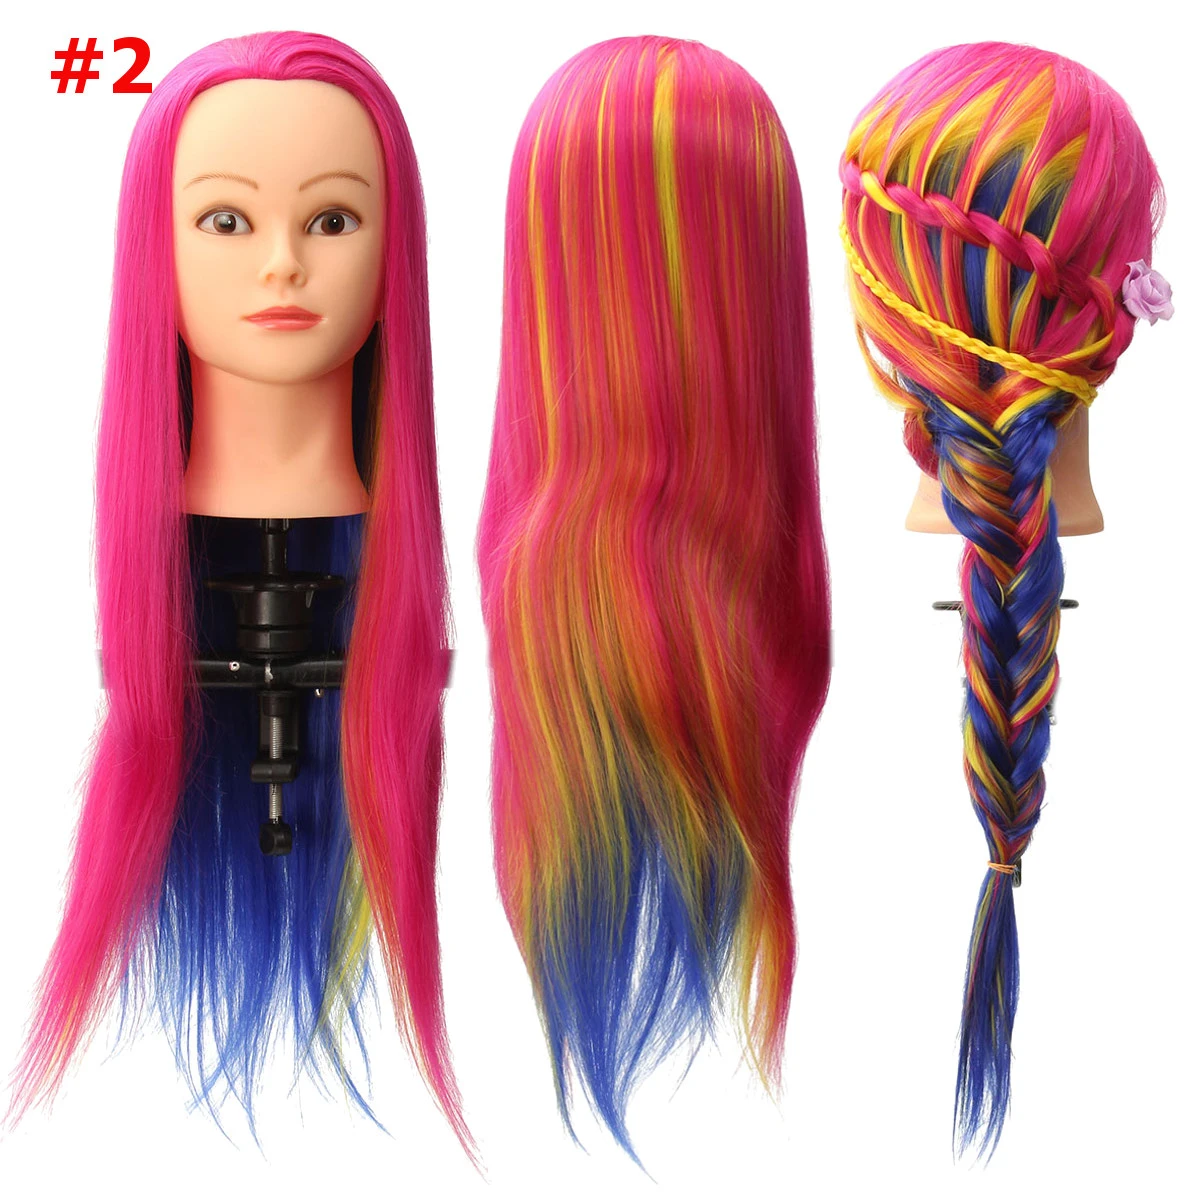 8 Colors Salon Hairdressing Braiding Practice Mannequin Hair Training Head Models With Clamp Holder 